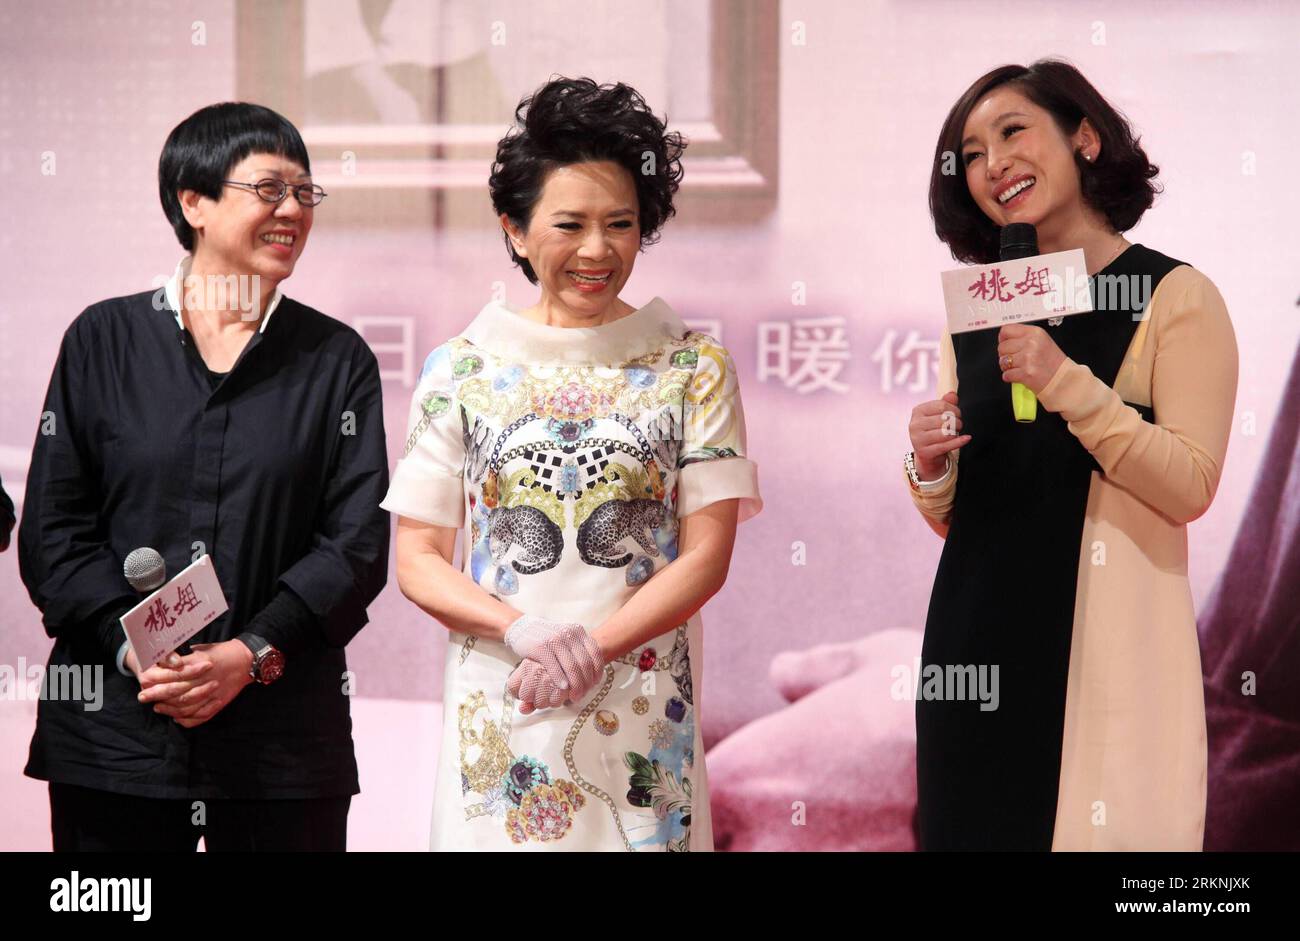 Bildnummer: 57214909  Datum: 05.03.2012  Copyright: imago/Xinhua (120305) -- BEIJING, March 5, 2012 (Xinhua) -- Ann Hui (L), director of the film A Simple Life , attends a press conference with actresses Deanie Ip (C) and Qin Hailu in Beijing, capital of China, March 5, 2012. The film will be premiered in the Chinese mainland on March 8. (Xinhua/Yang Le) (lmm) CHINA-BEIJING-FILM-A SIMPLE LIFE-PRESS CONFERENCE (CN) PUBLICATIONxNOTxINxCHN People Entertainment Film PK x0x xst 2012 quer      57214909 Date 05 03 2012 Copyright Imago XINHUA  Beijing March 5 2012 XINHUA Ann Hui l Director of The Film Stock Photo